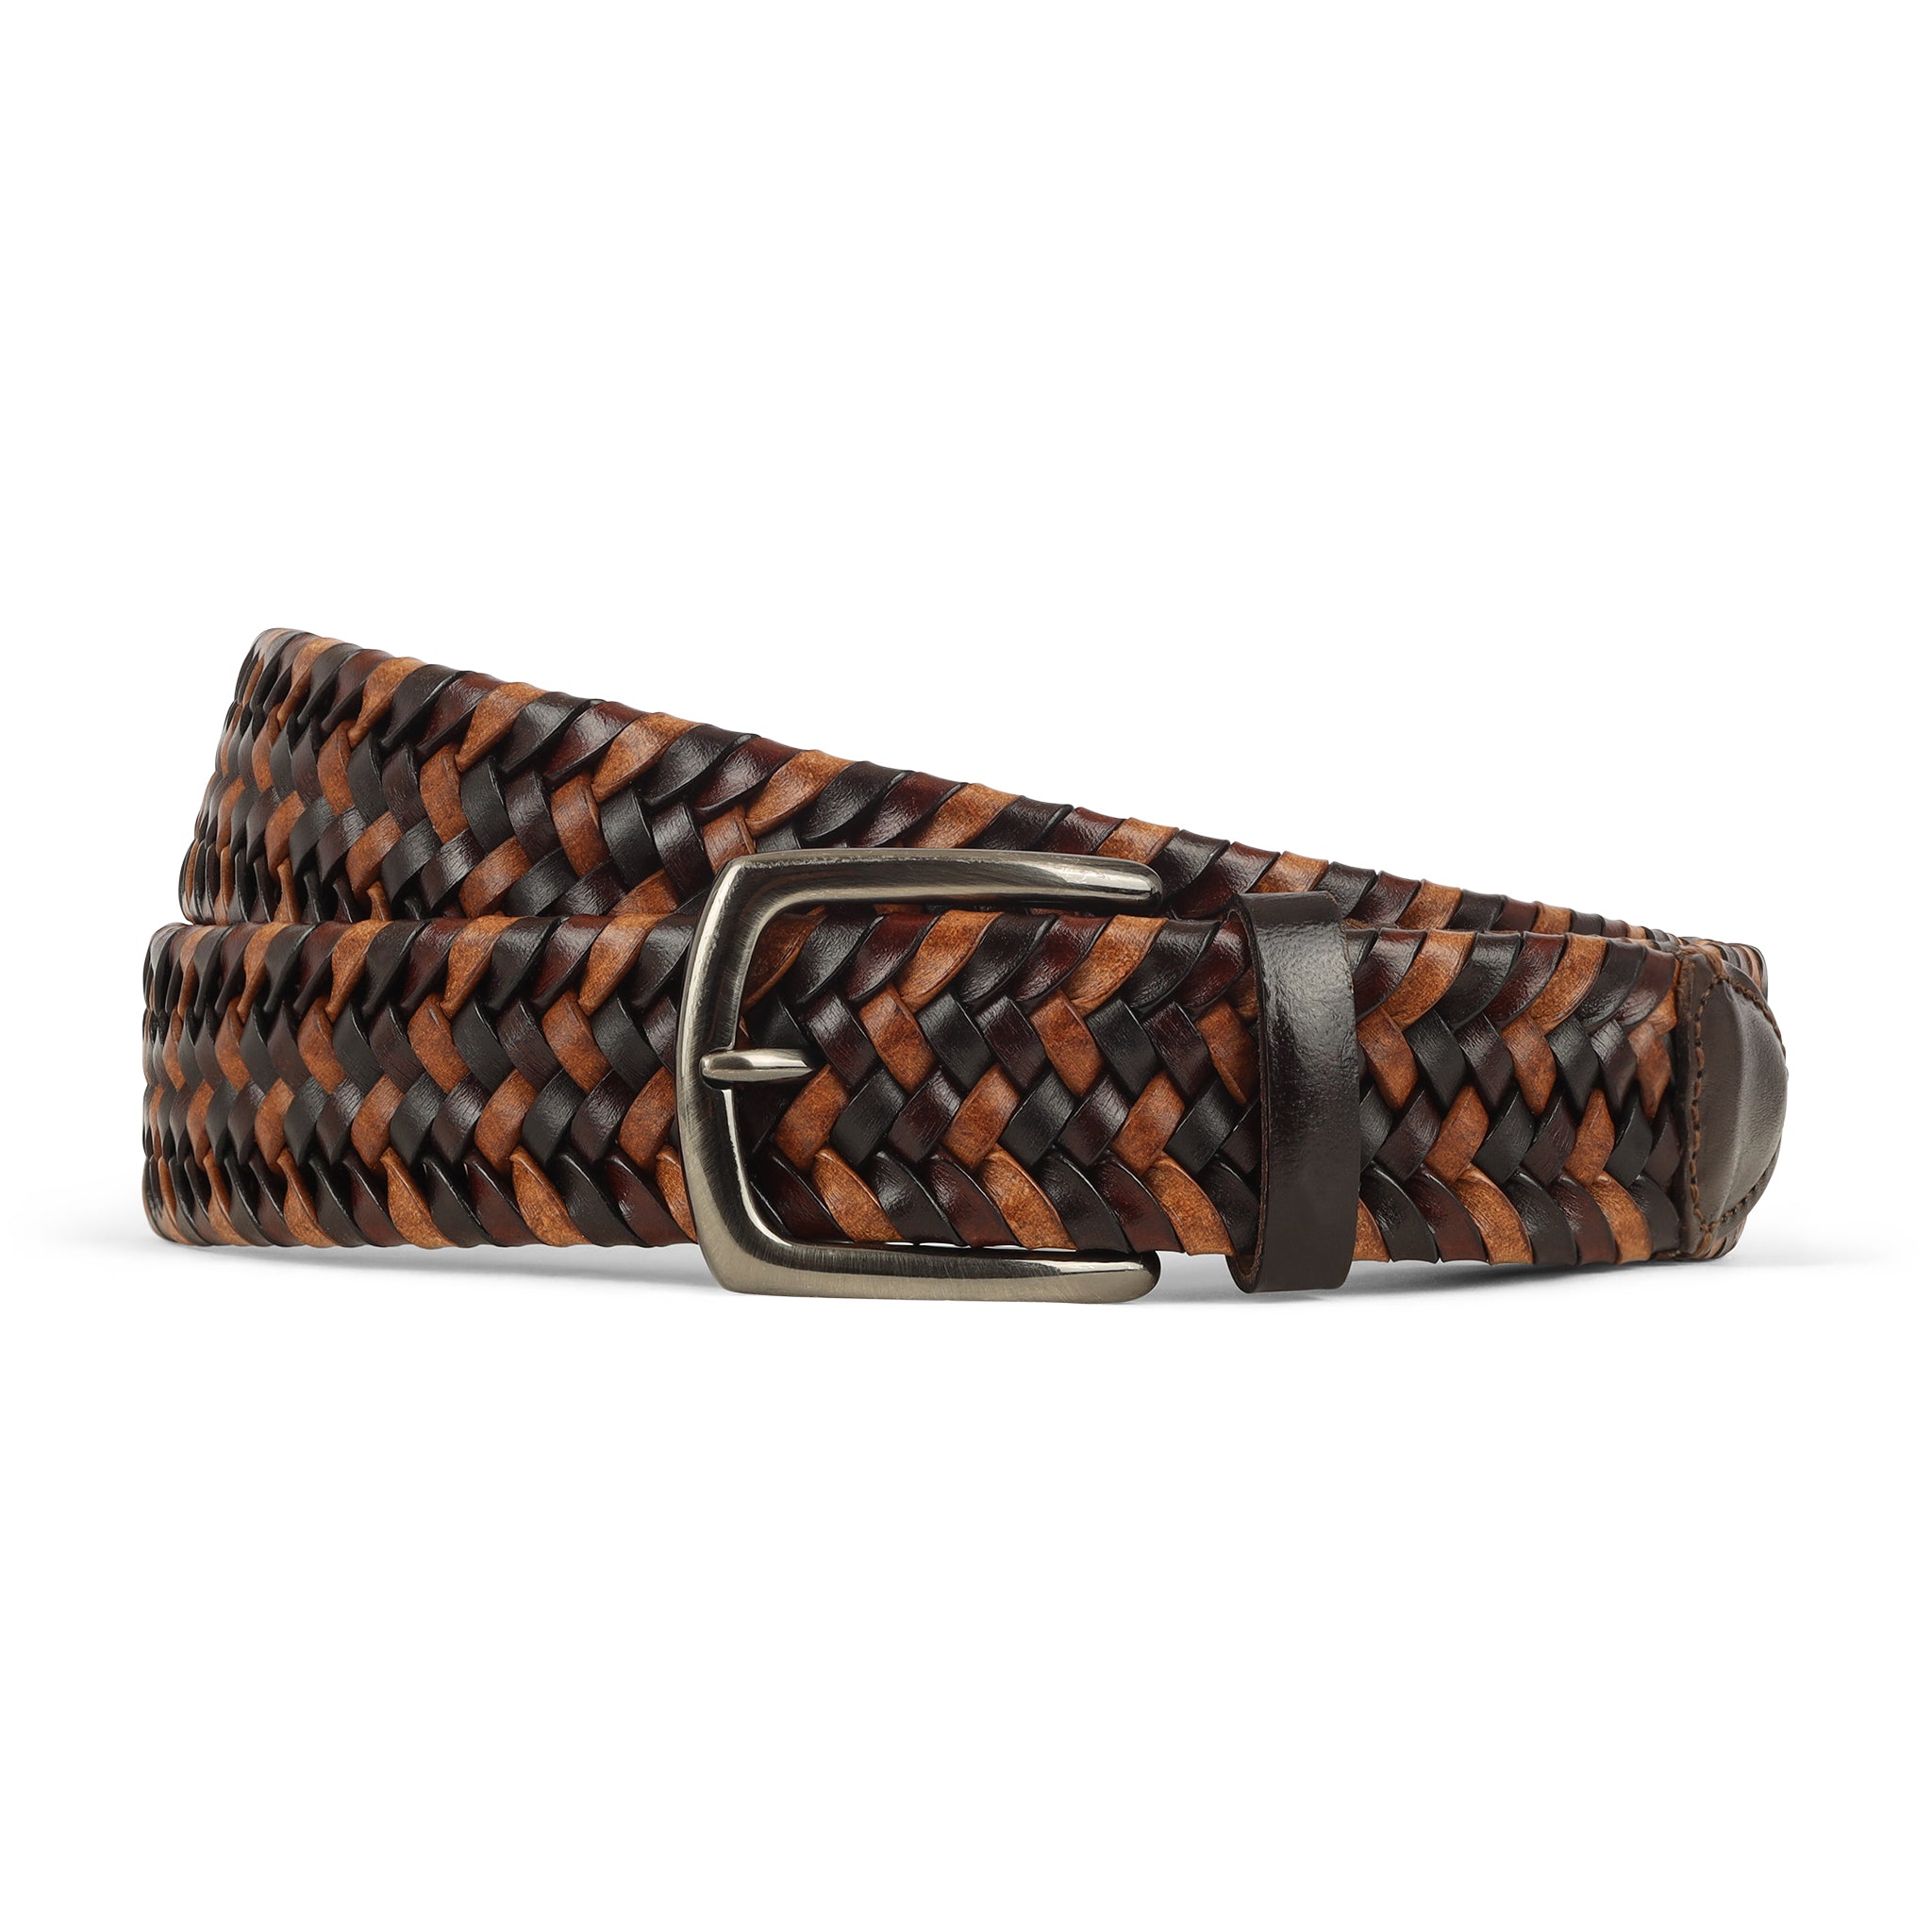 Cognac and Brown Braided Leather Belt